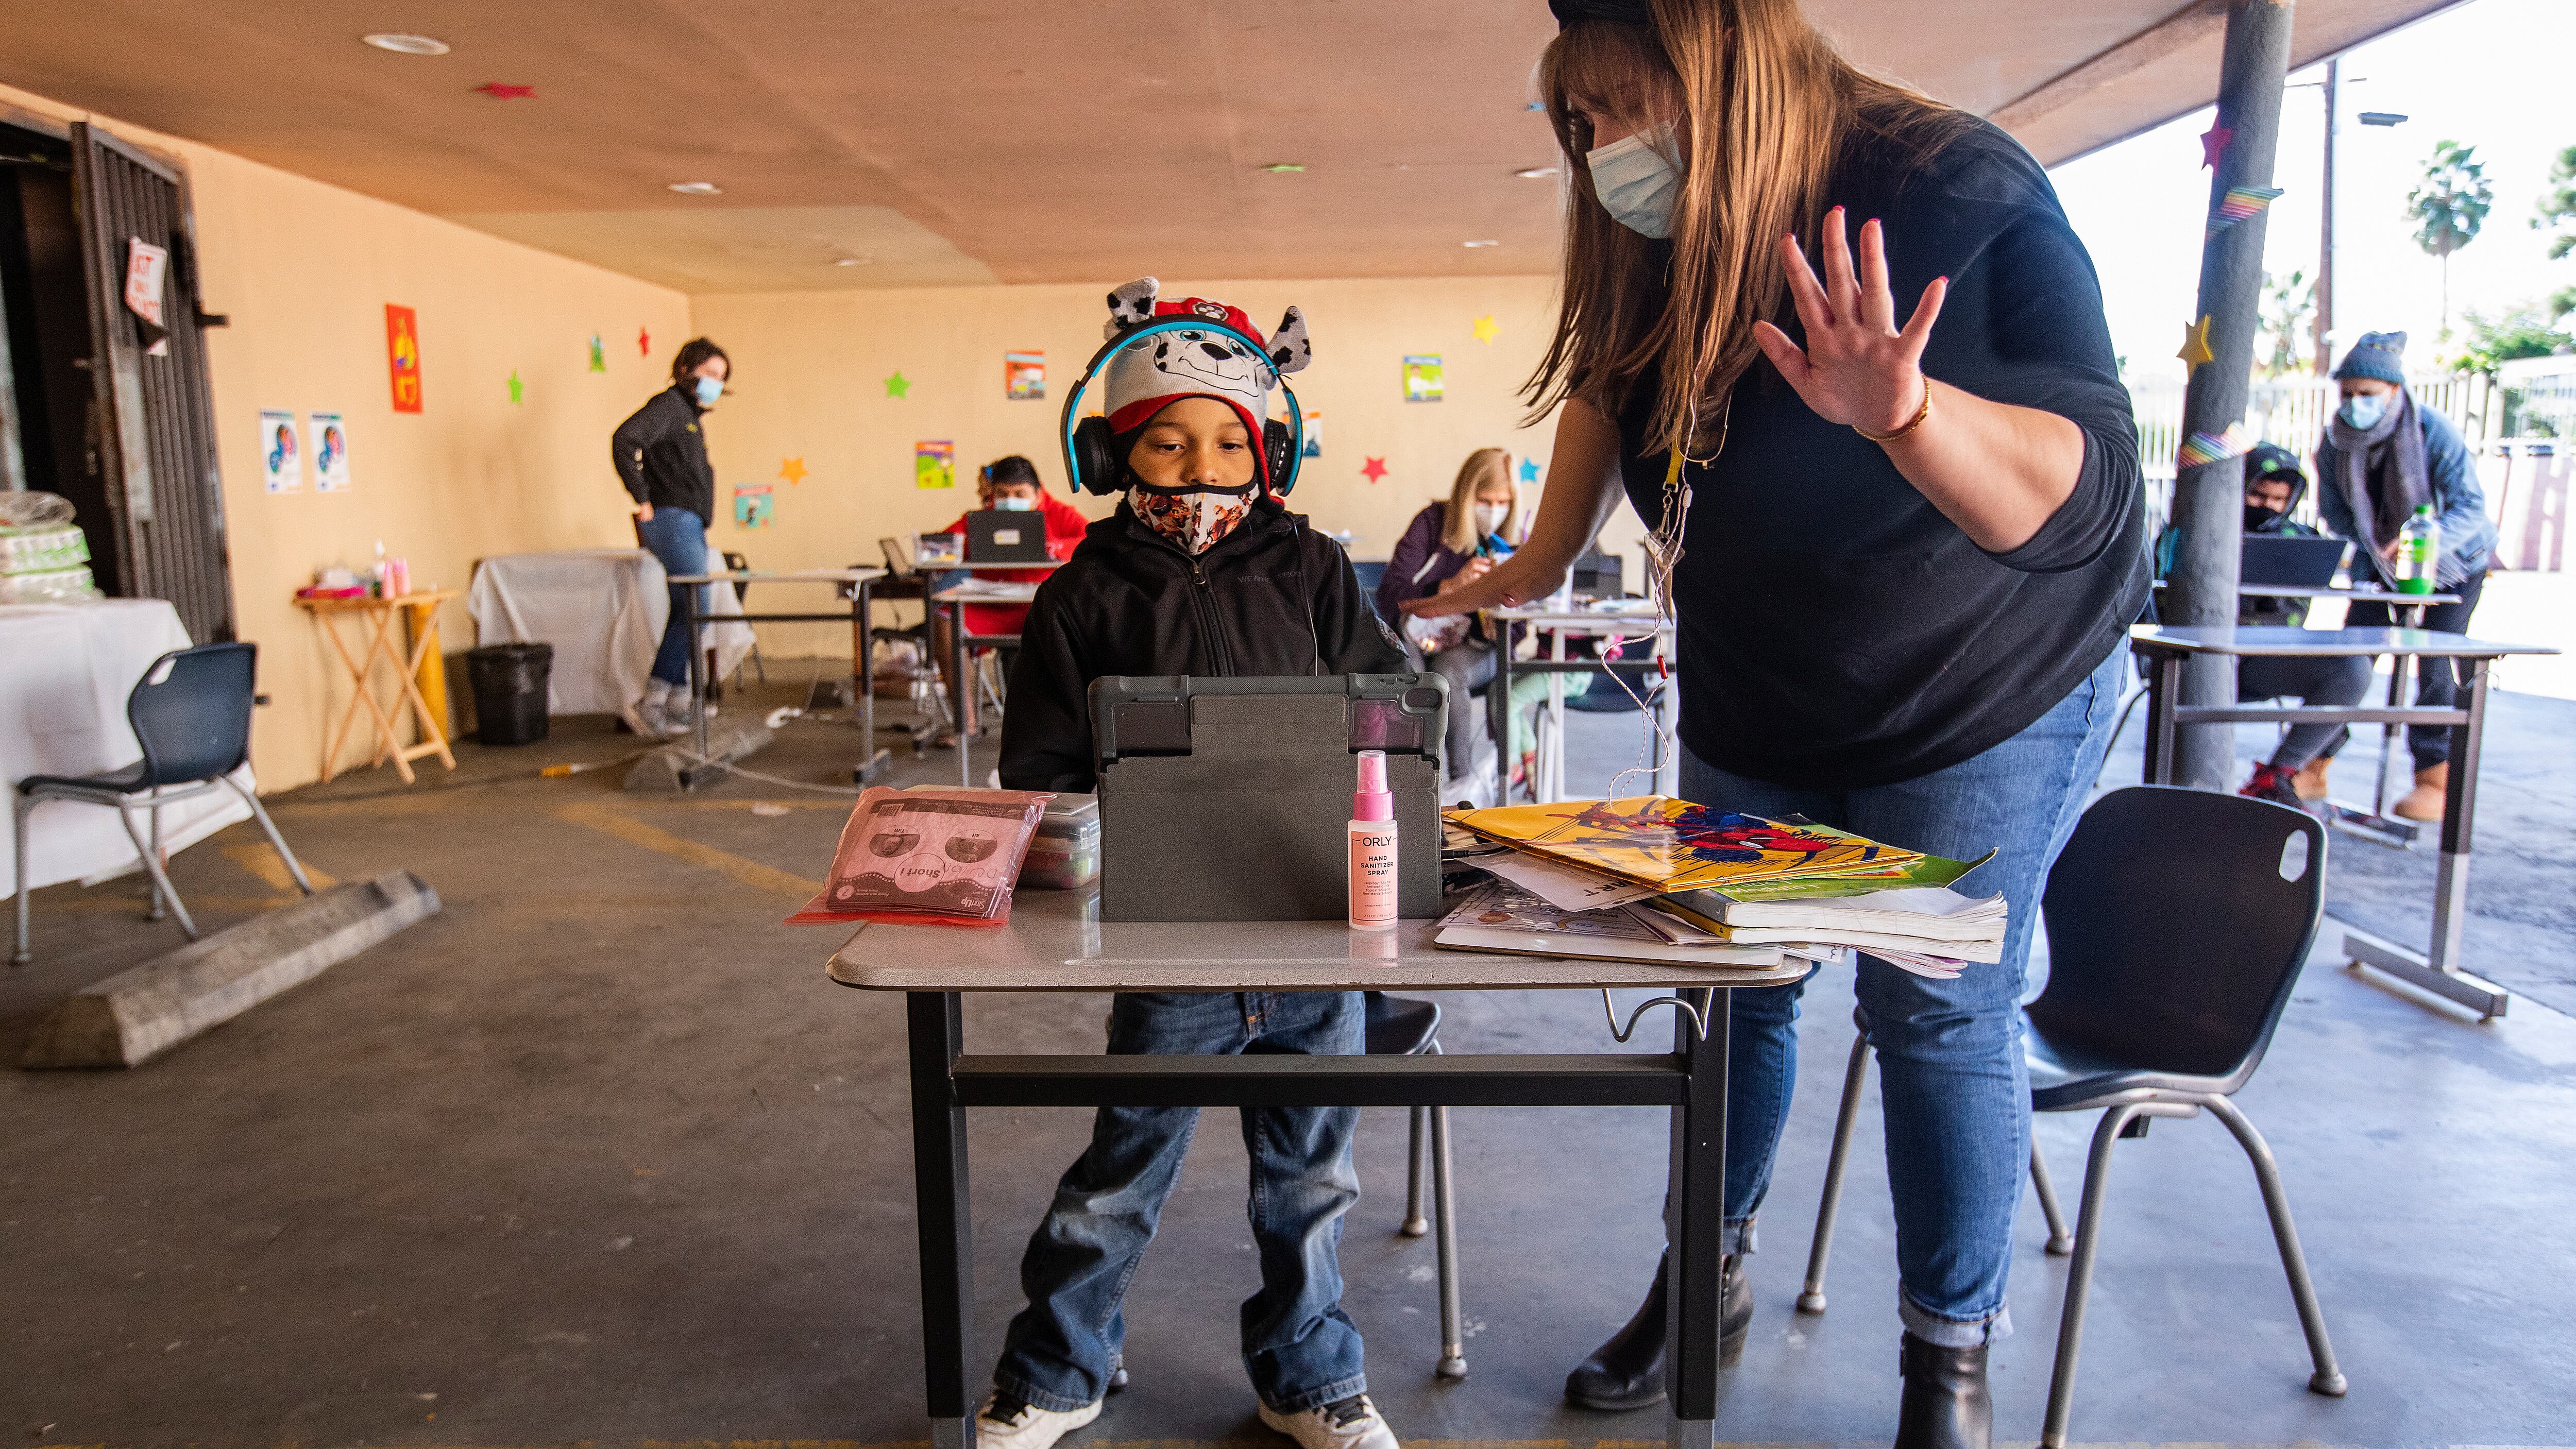 A volunteer helps a first-grade student learn math at a California learning pod for homeless children in November 2020.